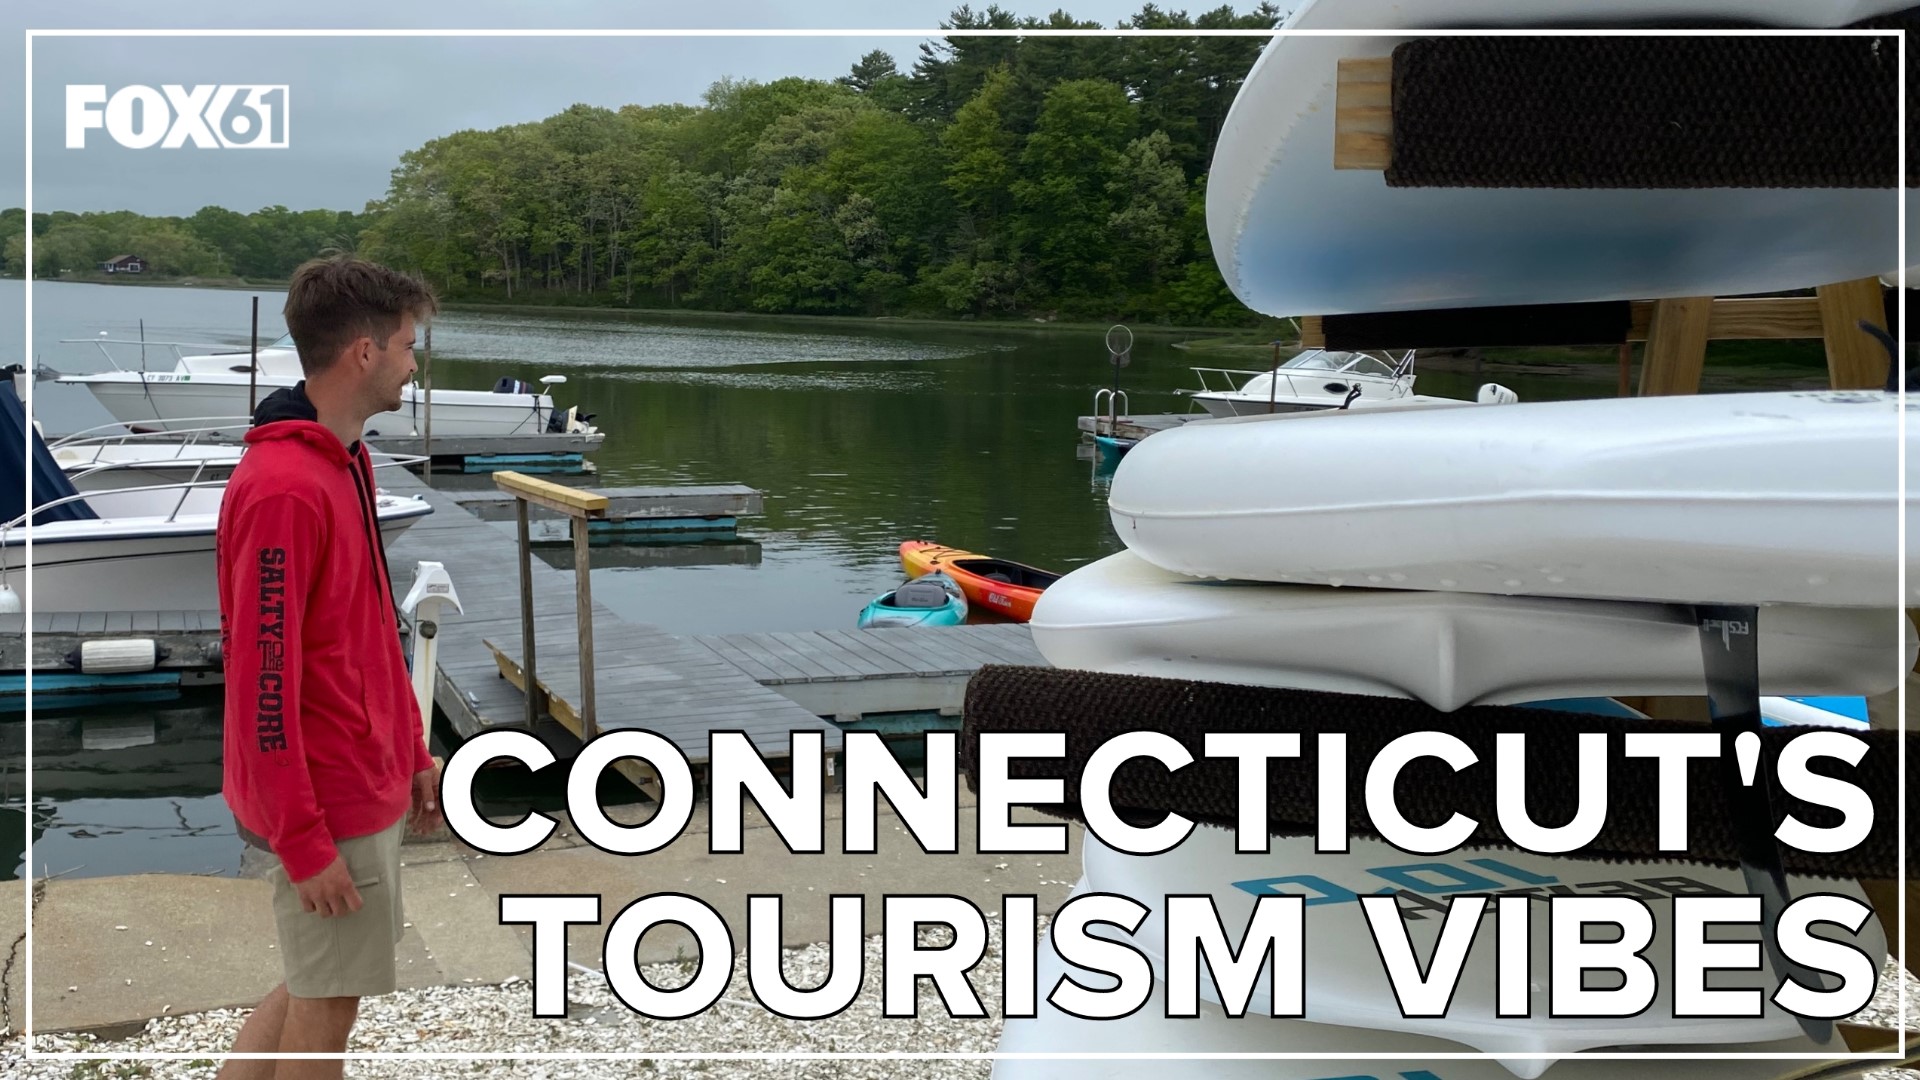 It’s the latest campaign from the Connecticut Office of Tourism to attract more visitors to the state.